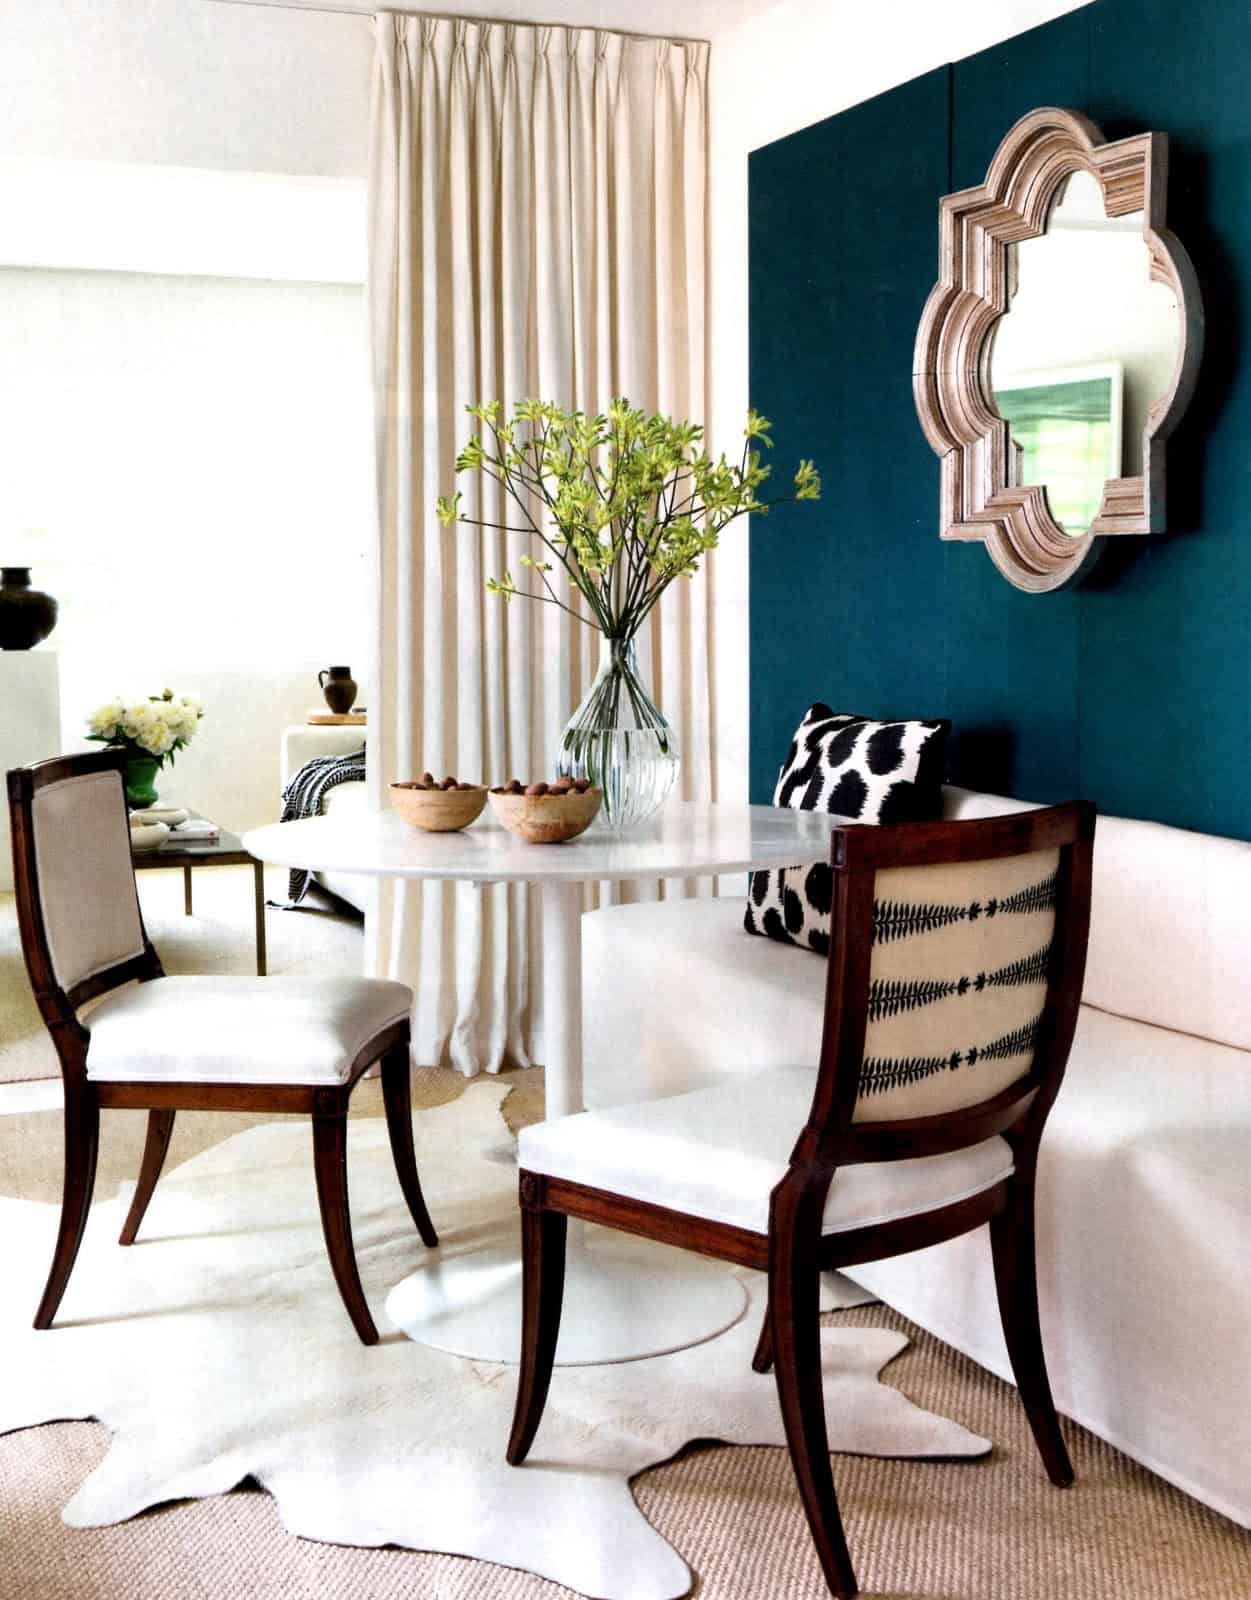 Using darker hues works well to elevate the space and give it an elegant fell.